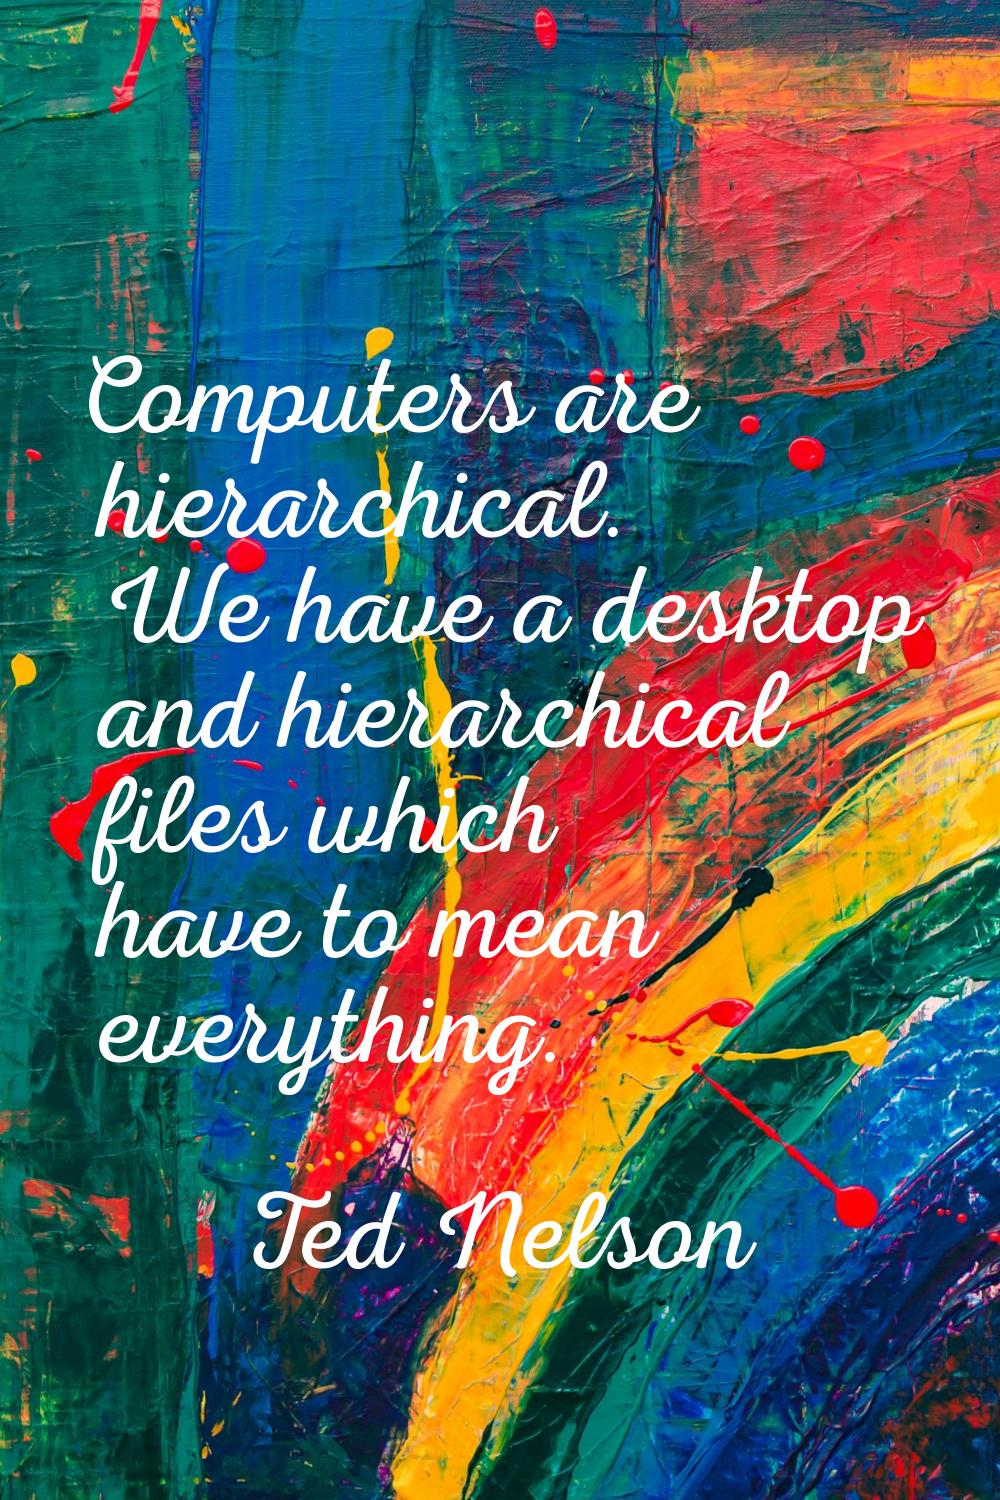 Computers are hierarchical. We have a desktop and hierarchical files which have to mean everything.